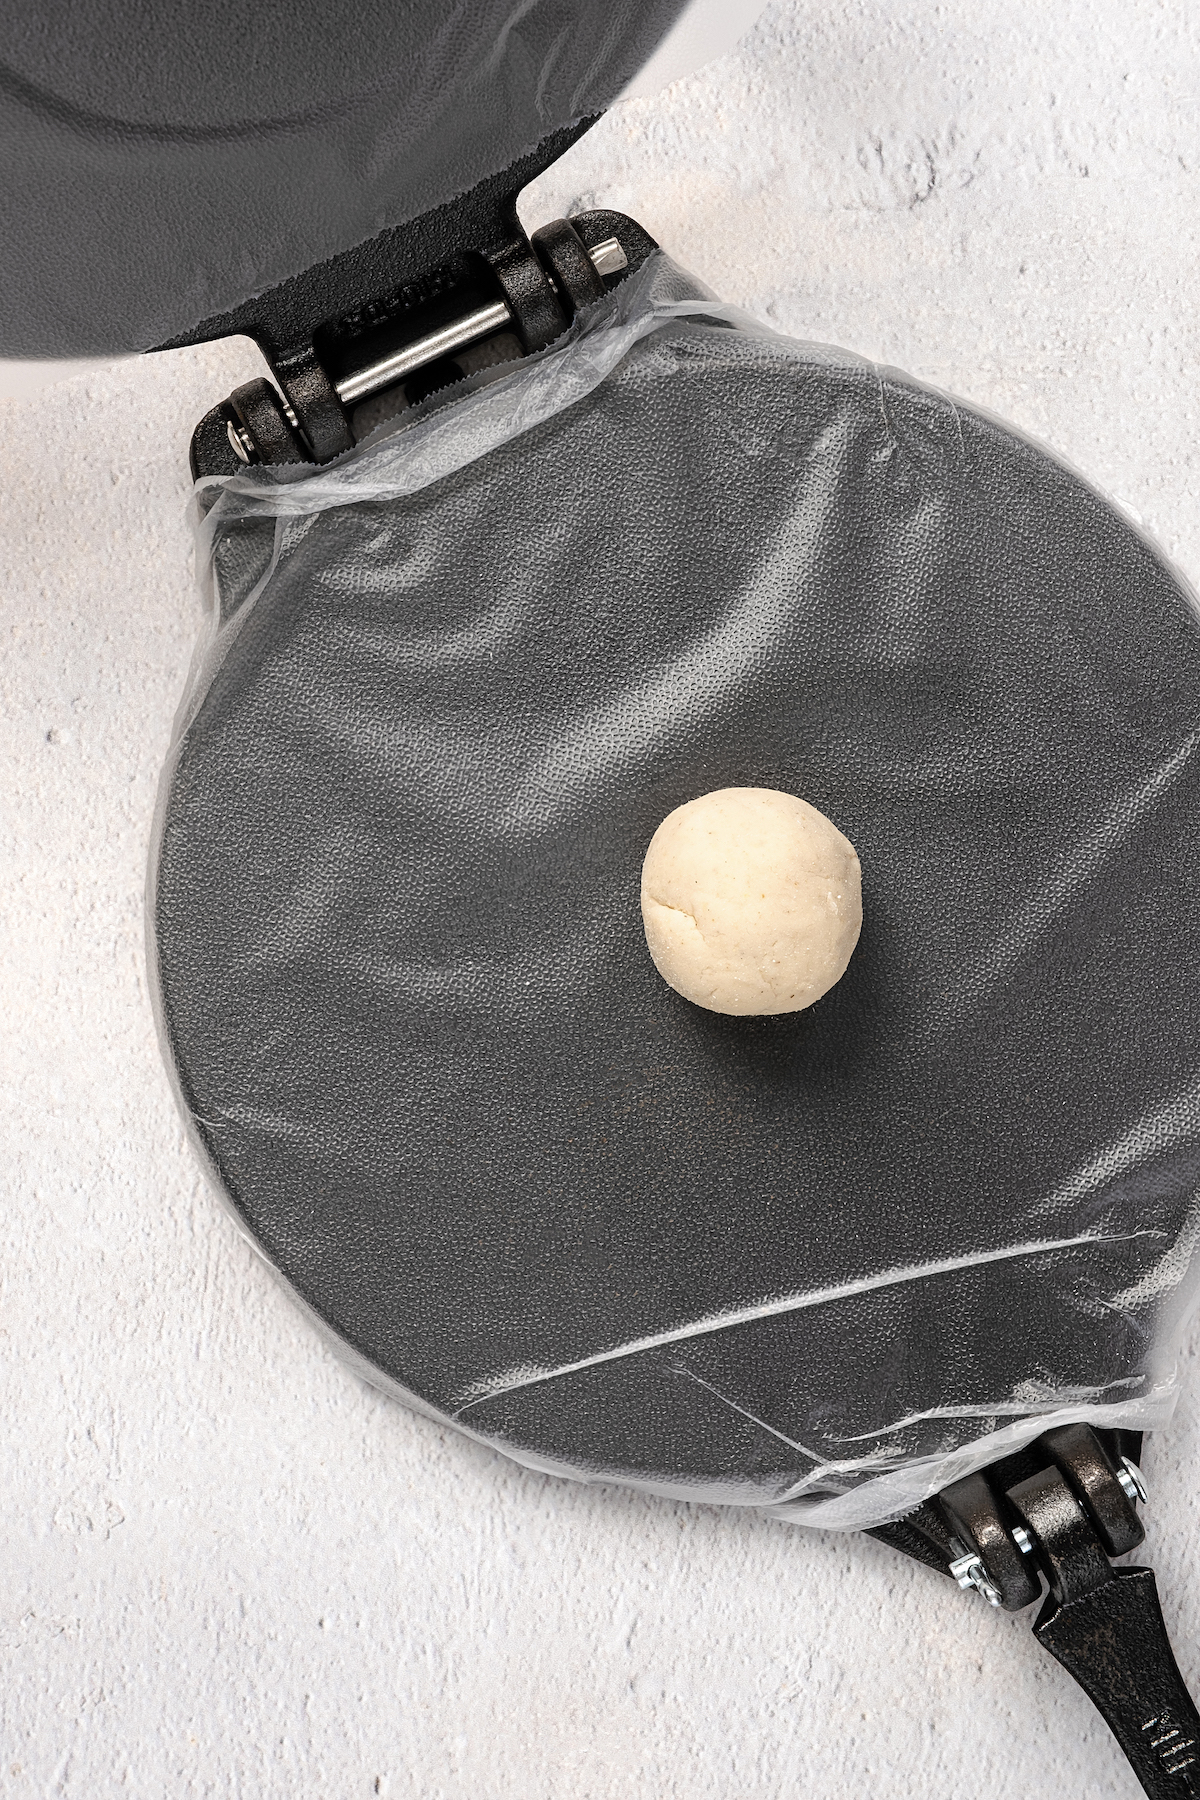 Placing a ball of dough on top of plastic wrap in a tortilla press.